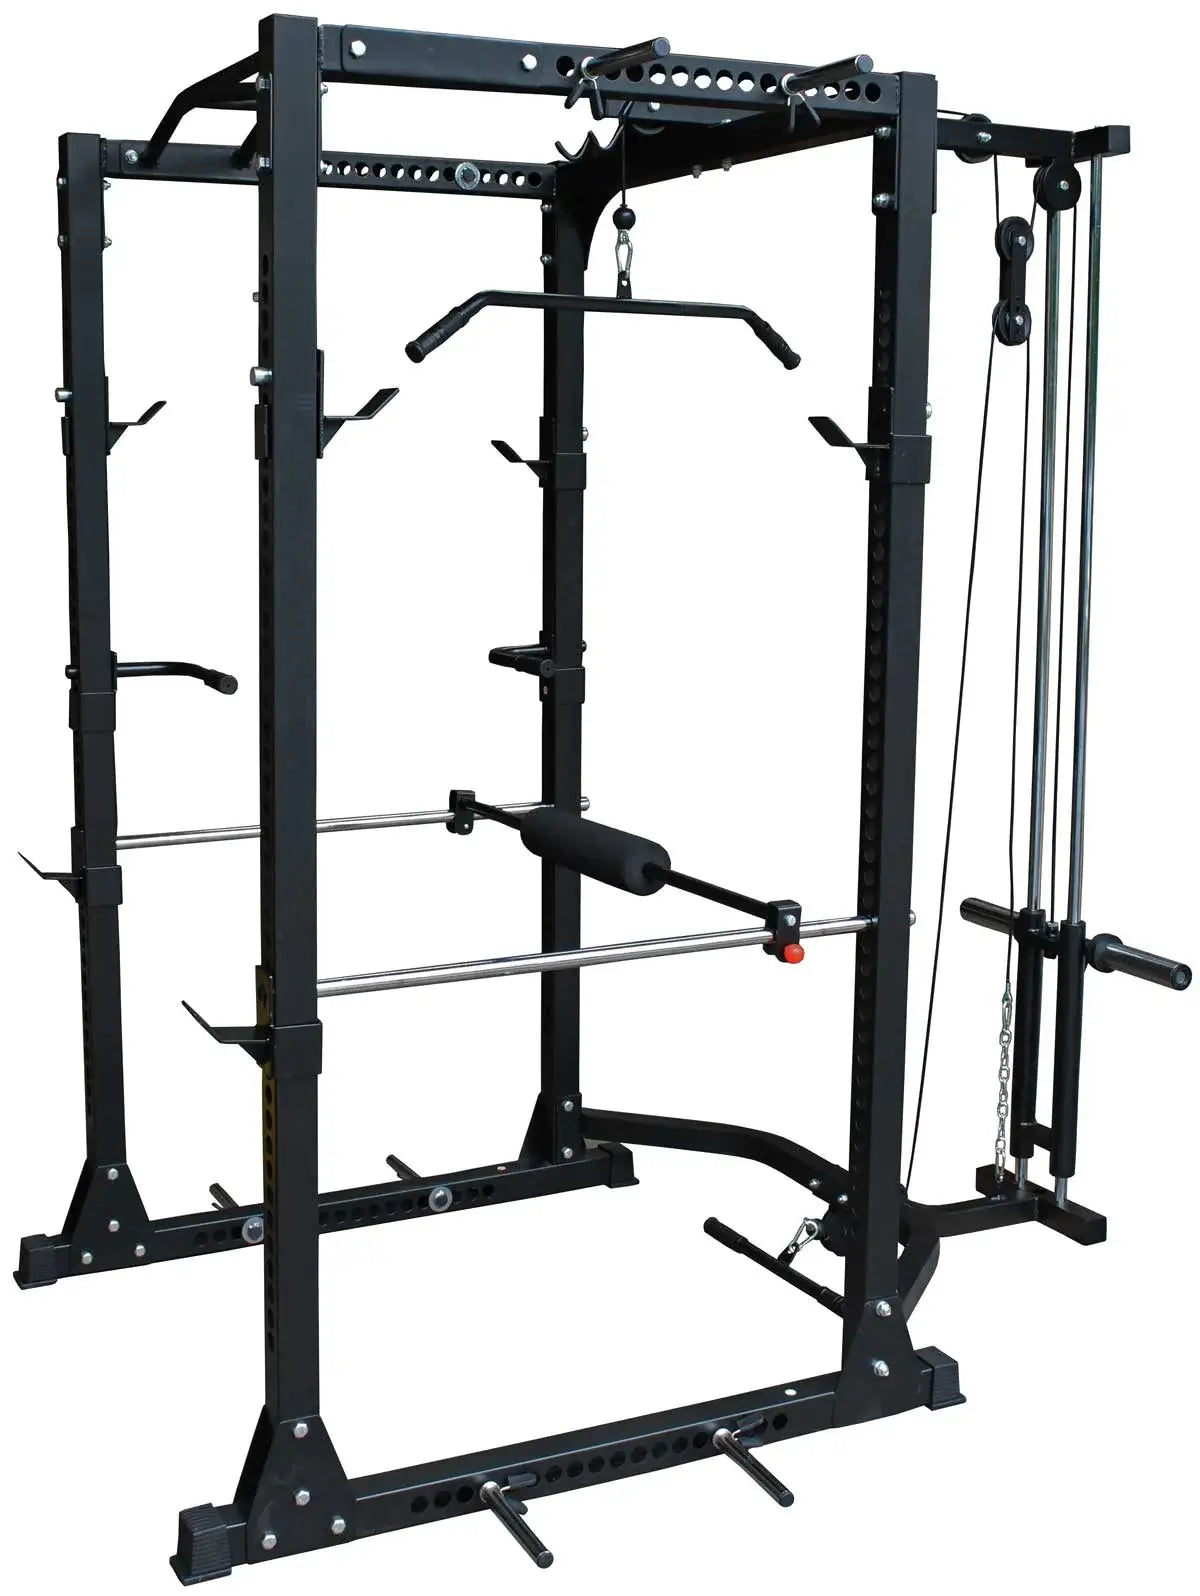 PACKAGE DEAL - Power Cage Including Lat Pull/Low Row Attachment